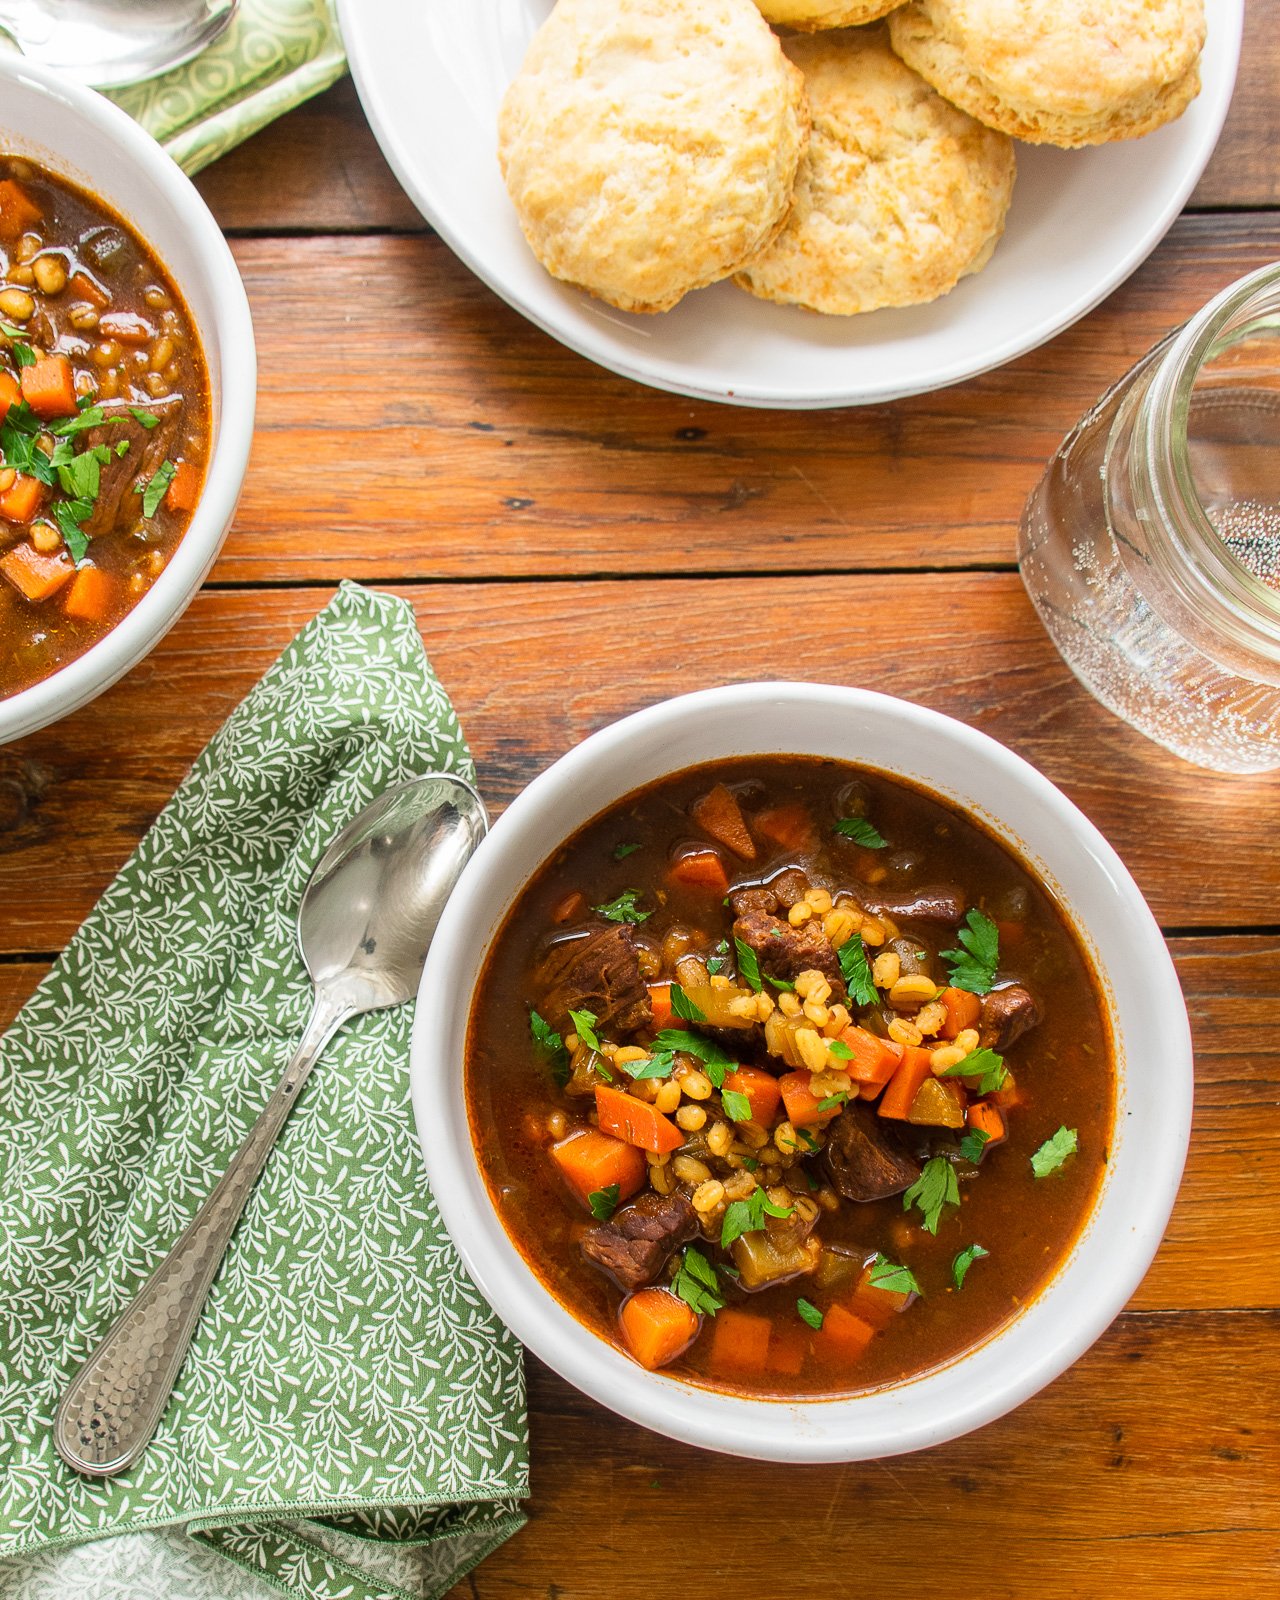 Traditional Beef and Barley Soup Recipe - Chef Billy Parisi